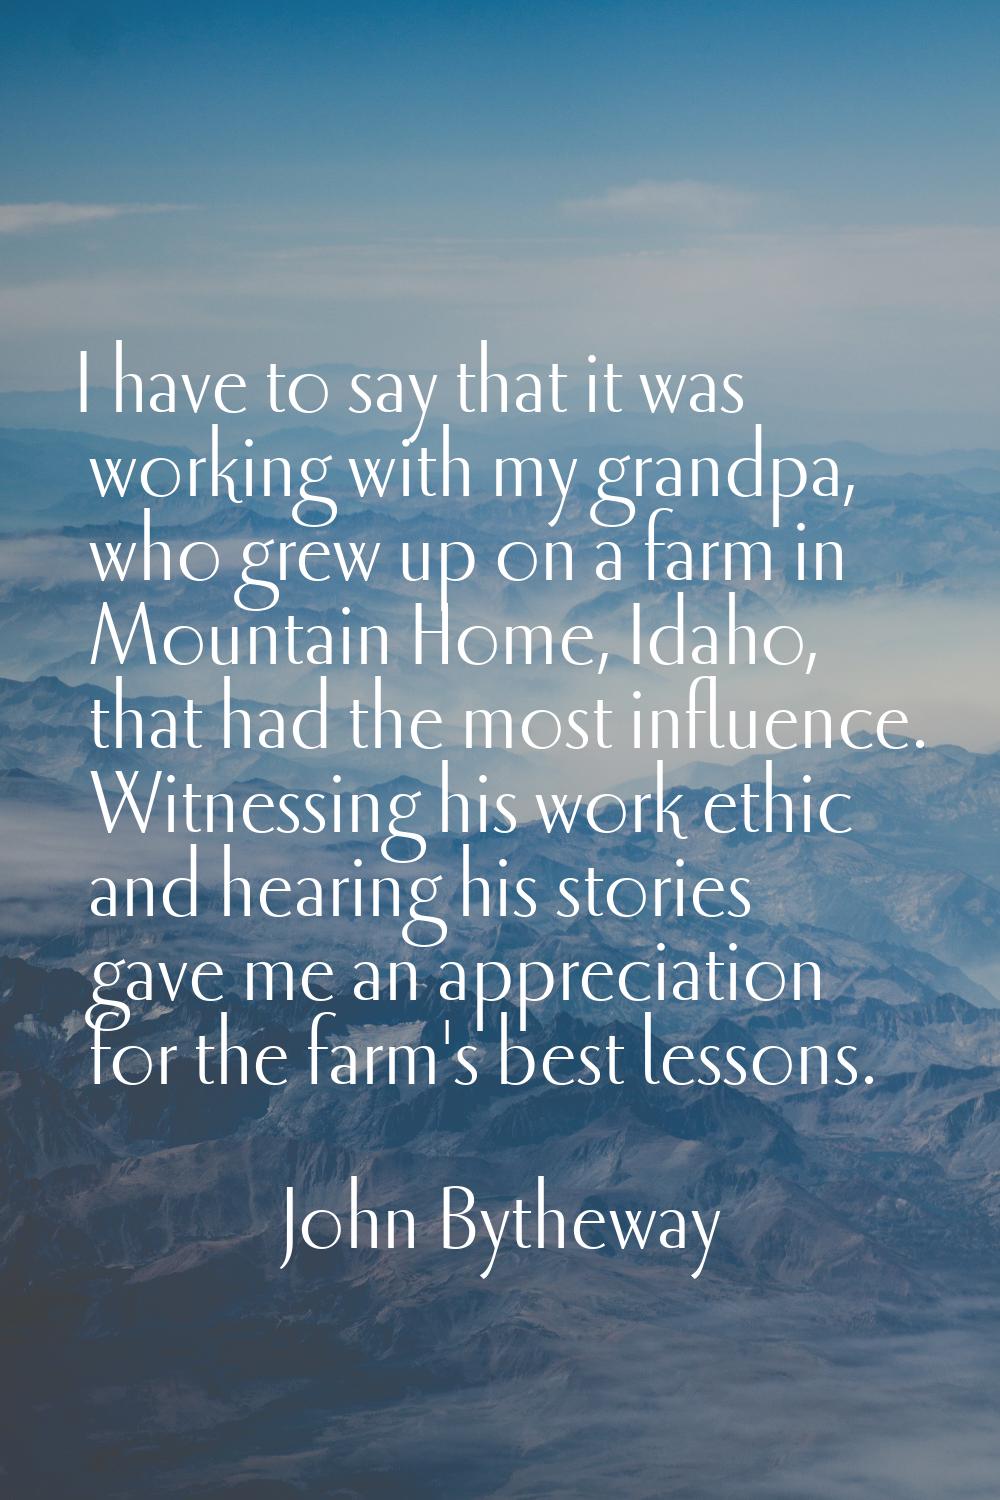 I have to say that it was working with my grandpa, who grew up on a farm in Mountain Home, Idaho, t